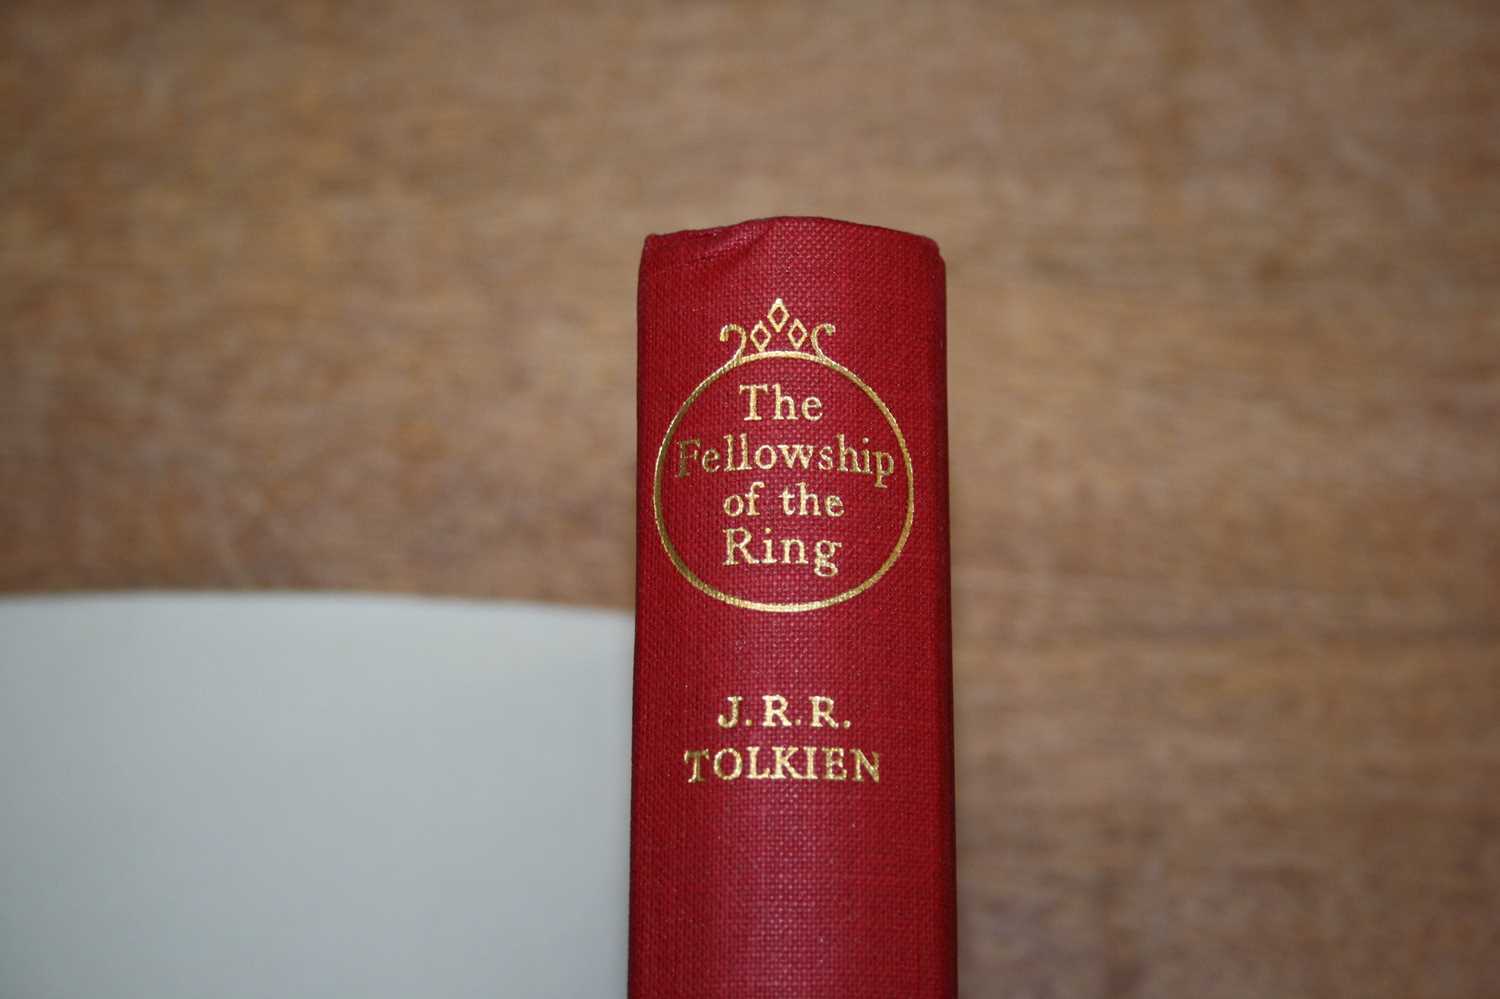 J.R.R.: The Lord Of The Rings, 3 Vols, Fellowship Of The Ring, Thirteenth Impression, George Allen - Image 25 of 29